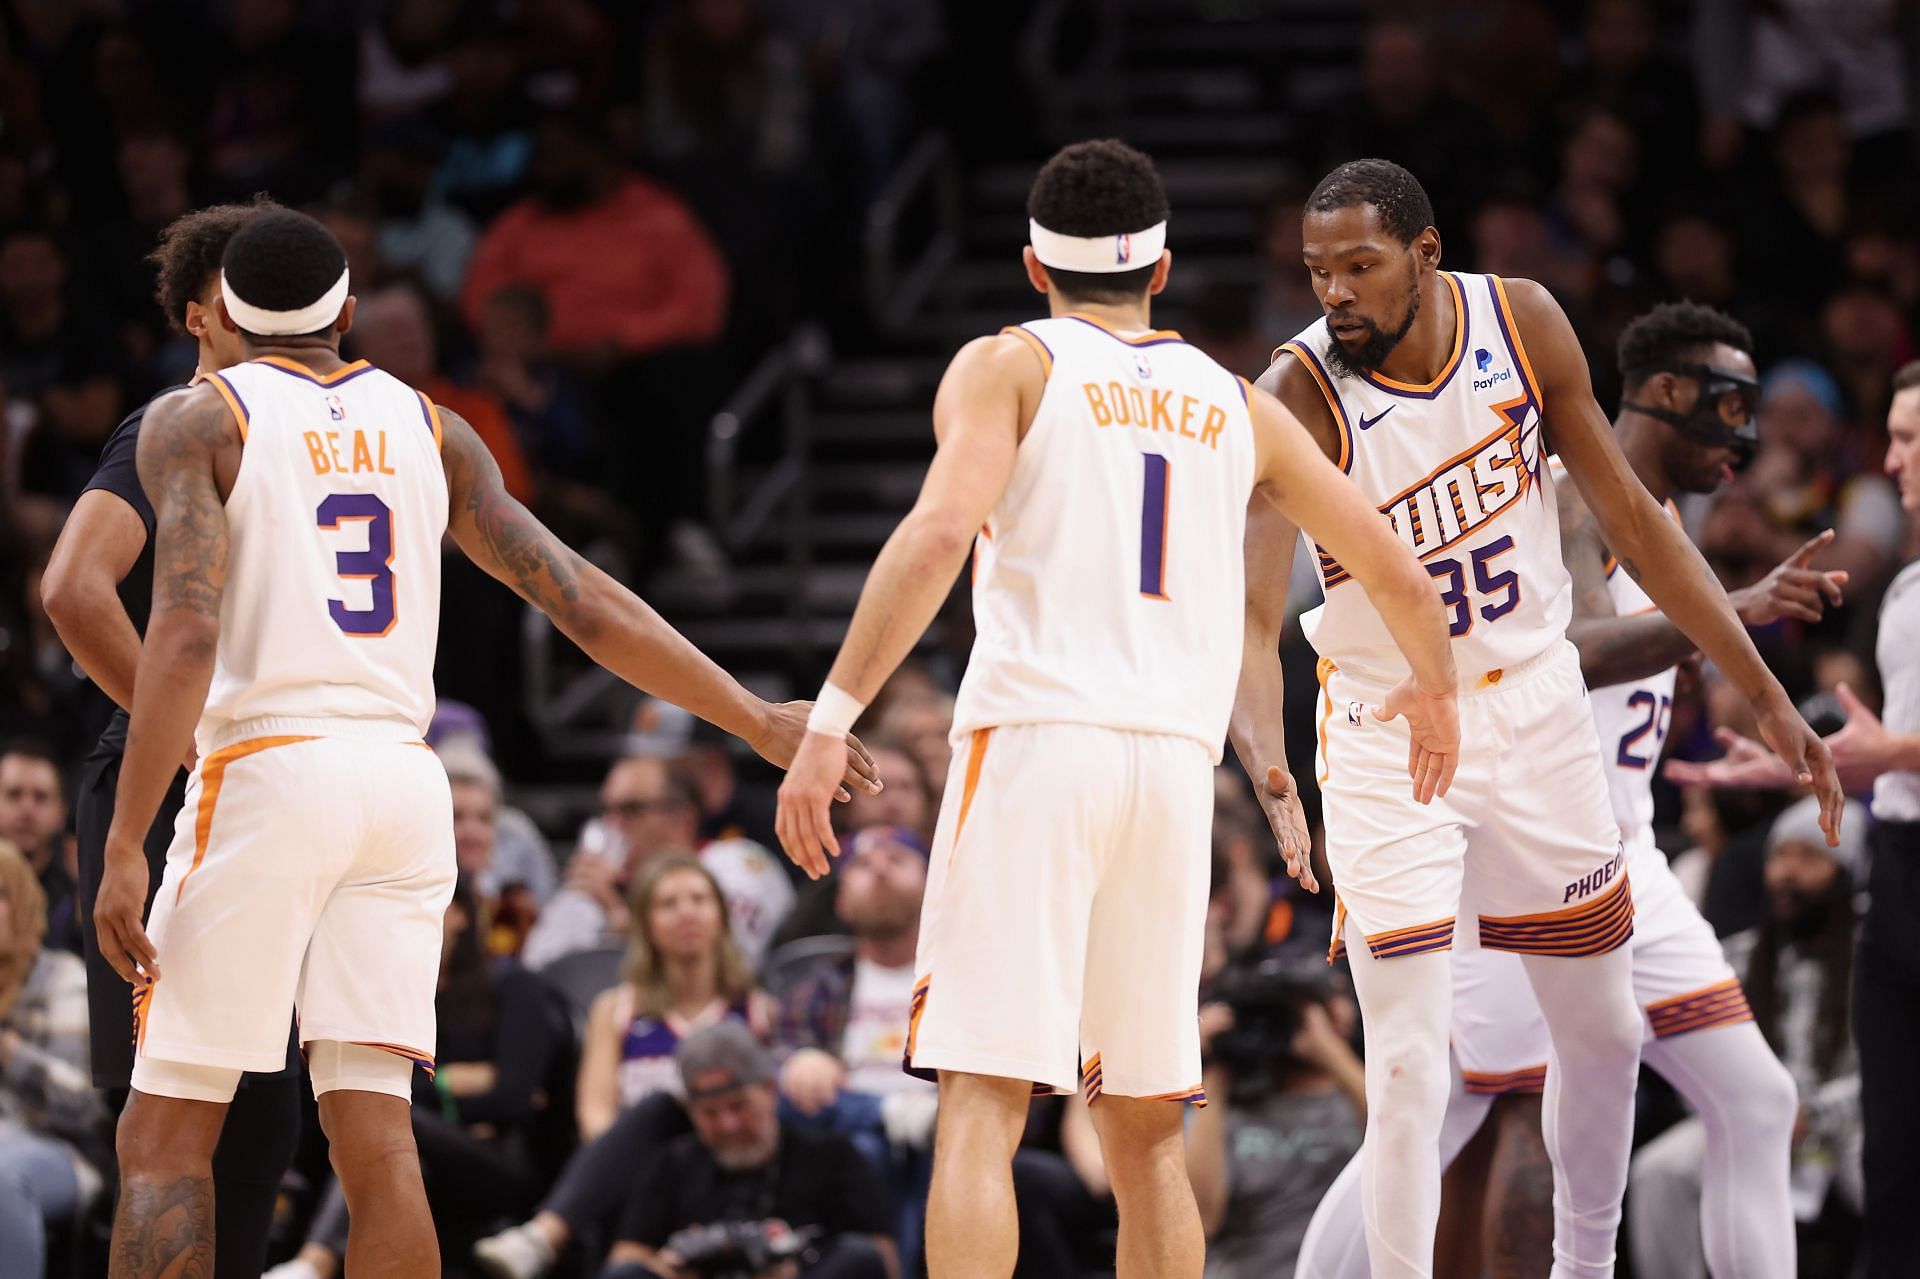 The Phoenix Suns move up the West with their win over the Atlanta Hawks.